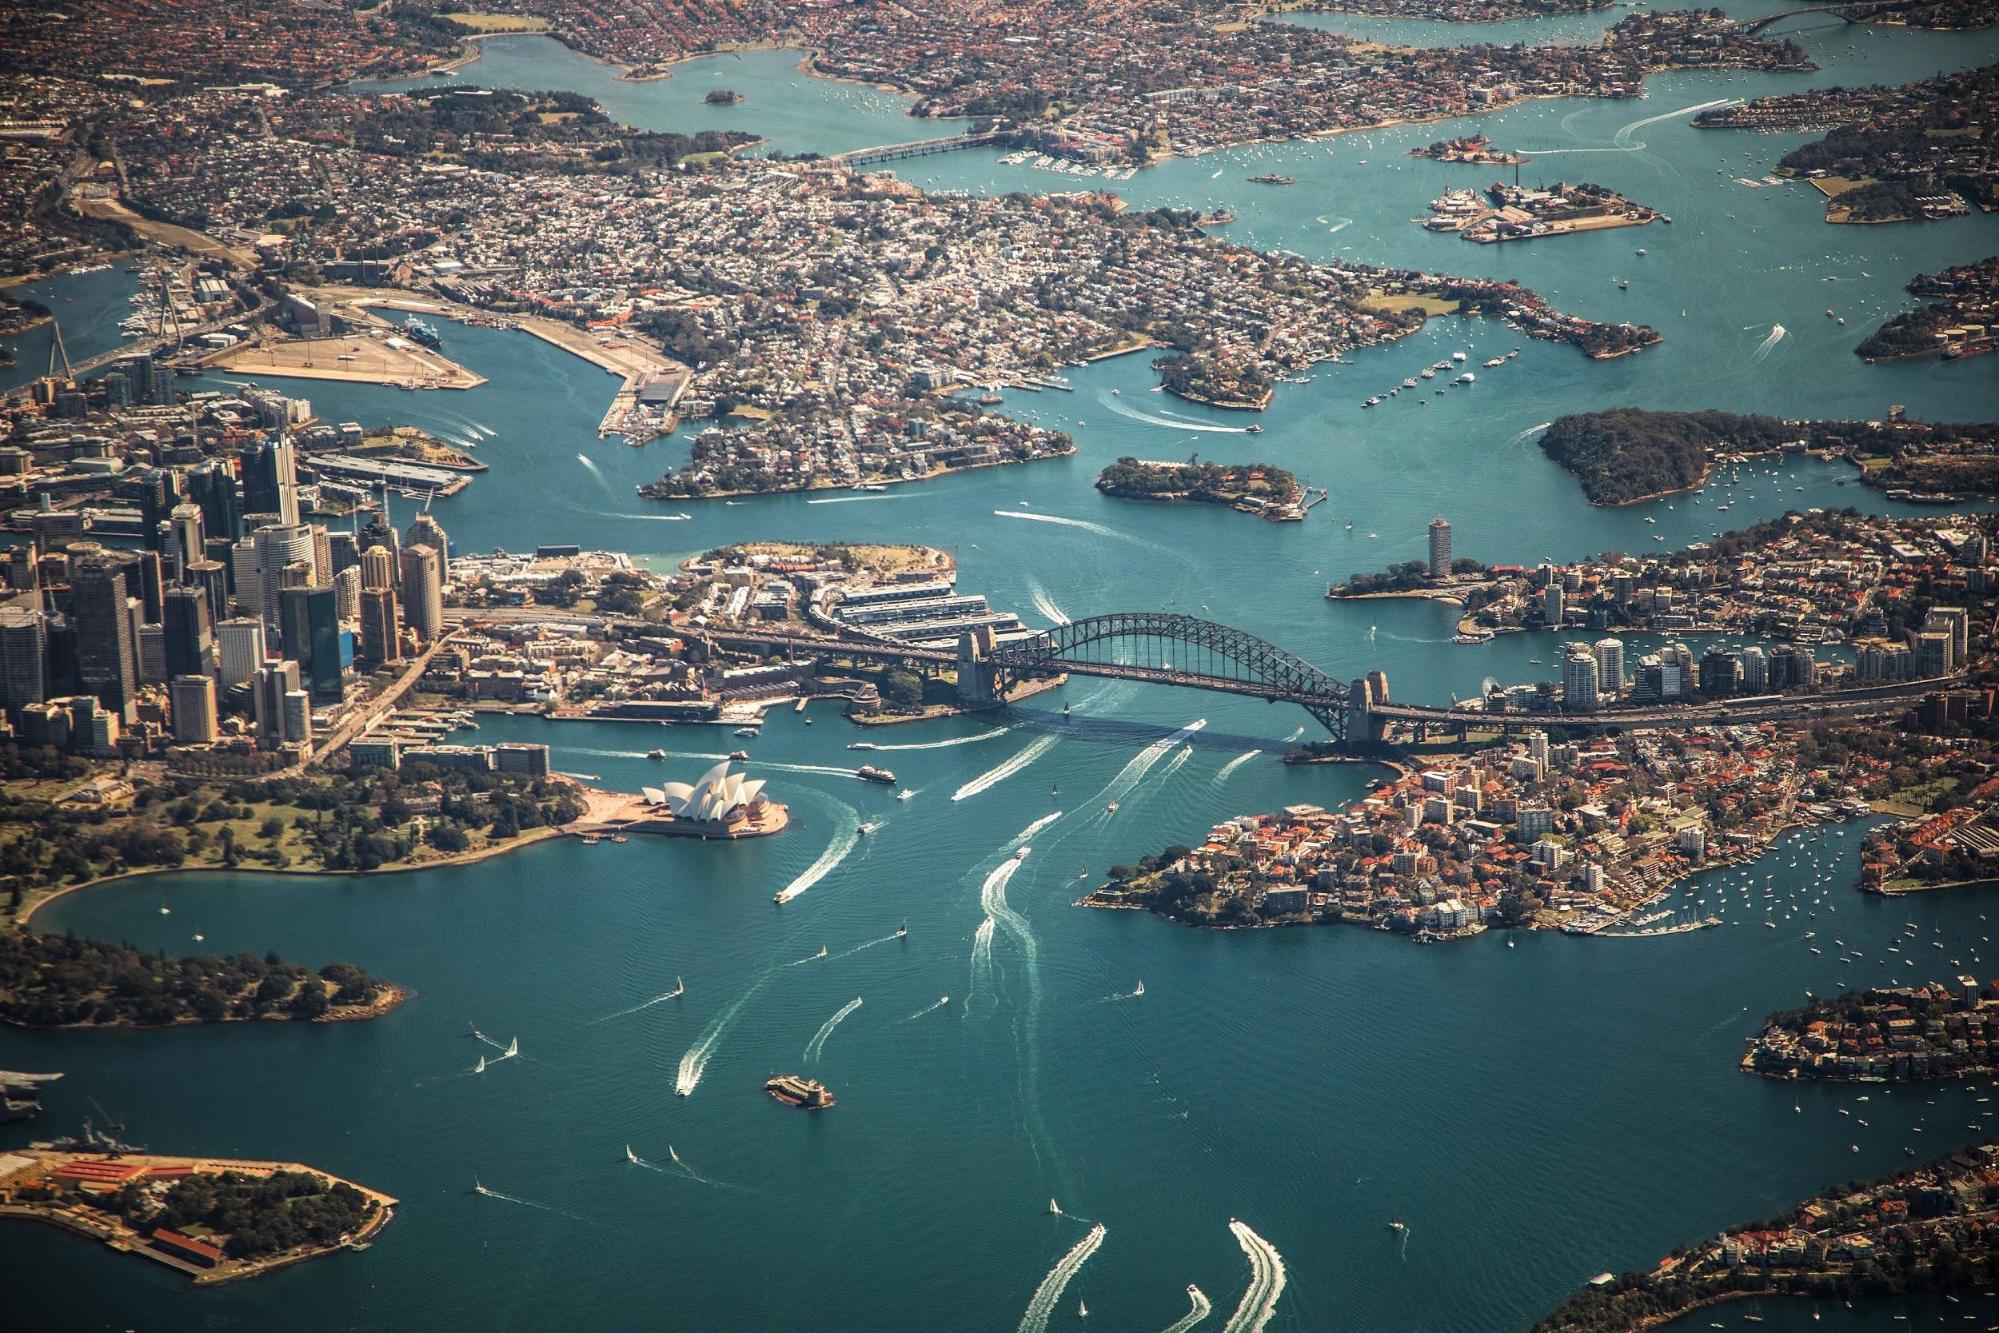 Sydney Experience on a Budget: Short Term Rental Guide